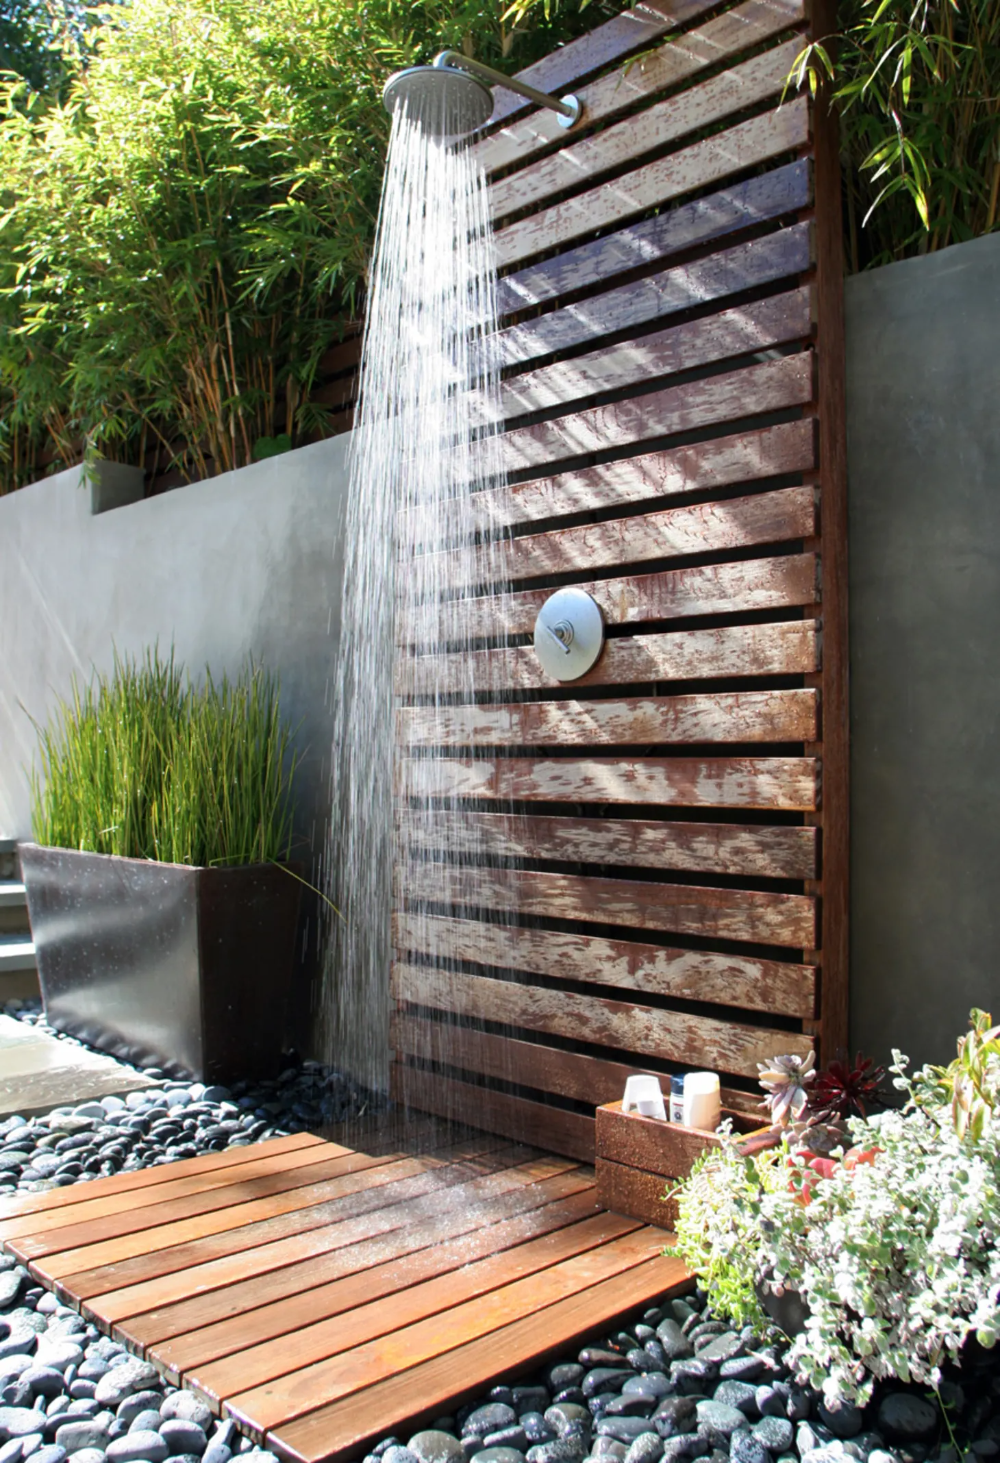 Refreshing Ways to Create an Outdoor Shower Oasis